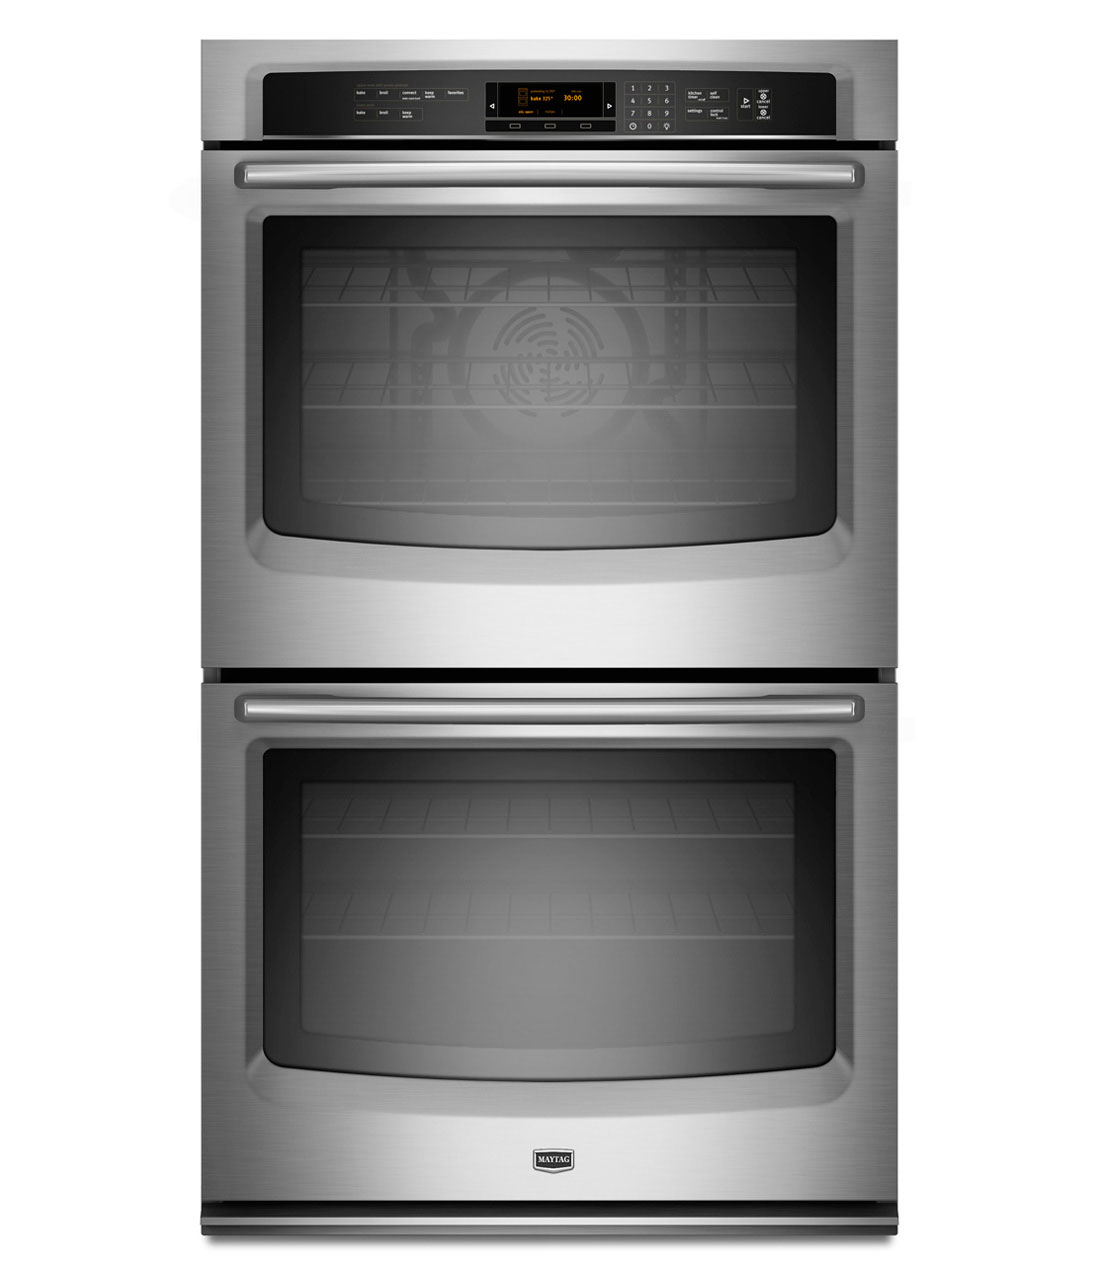 Maytag MEW9627AS 27" Double Electric Oven with EvenAir